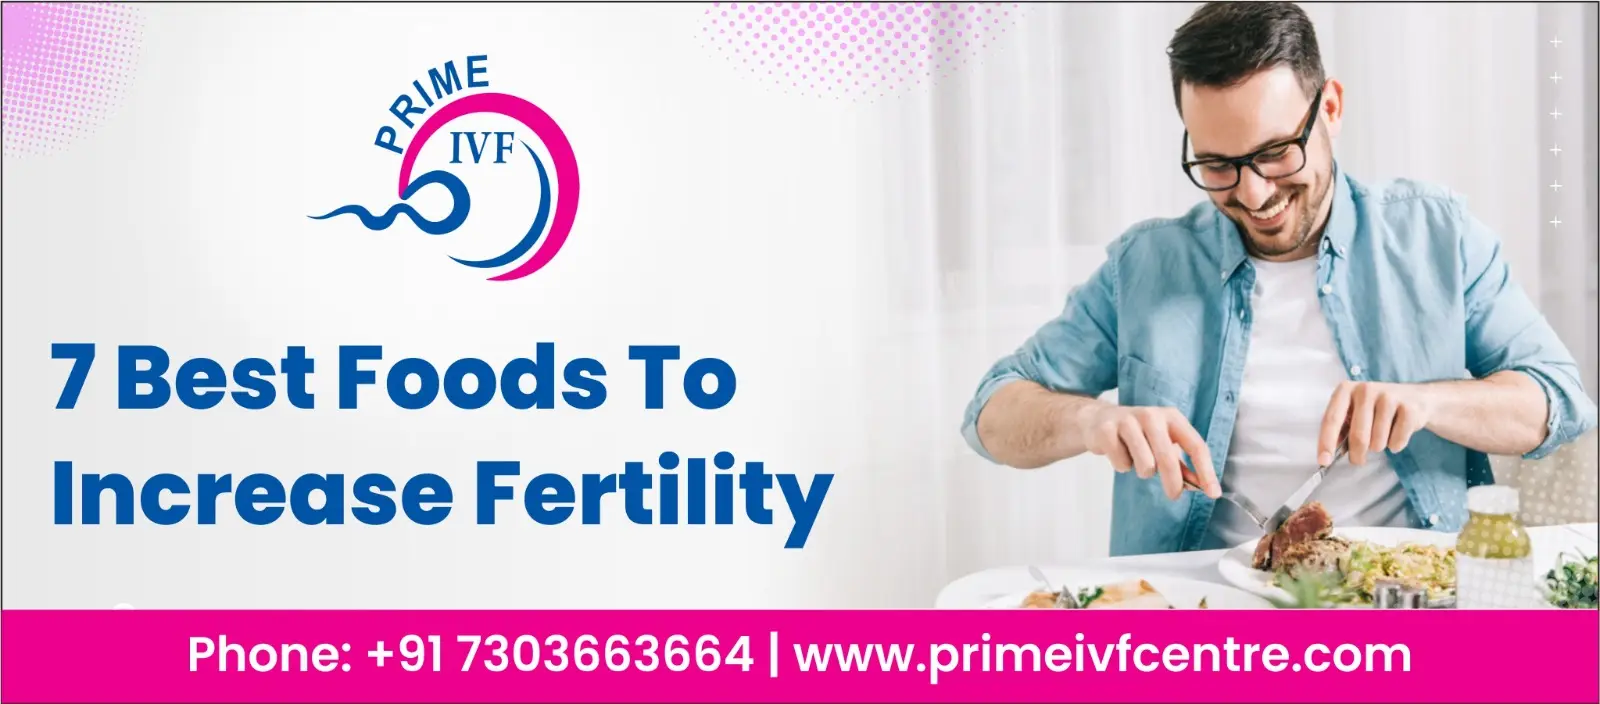 7 best foods to increase fertility